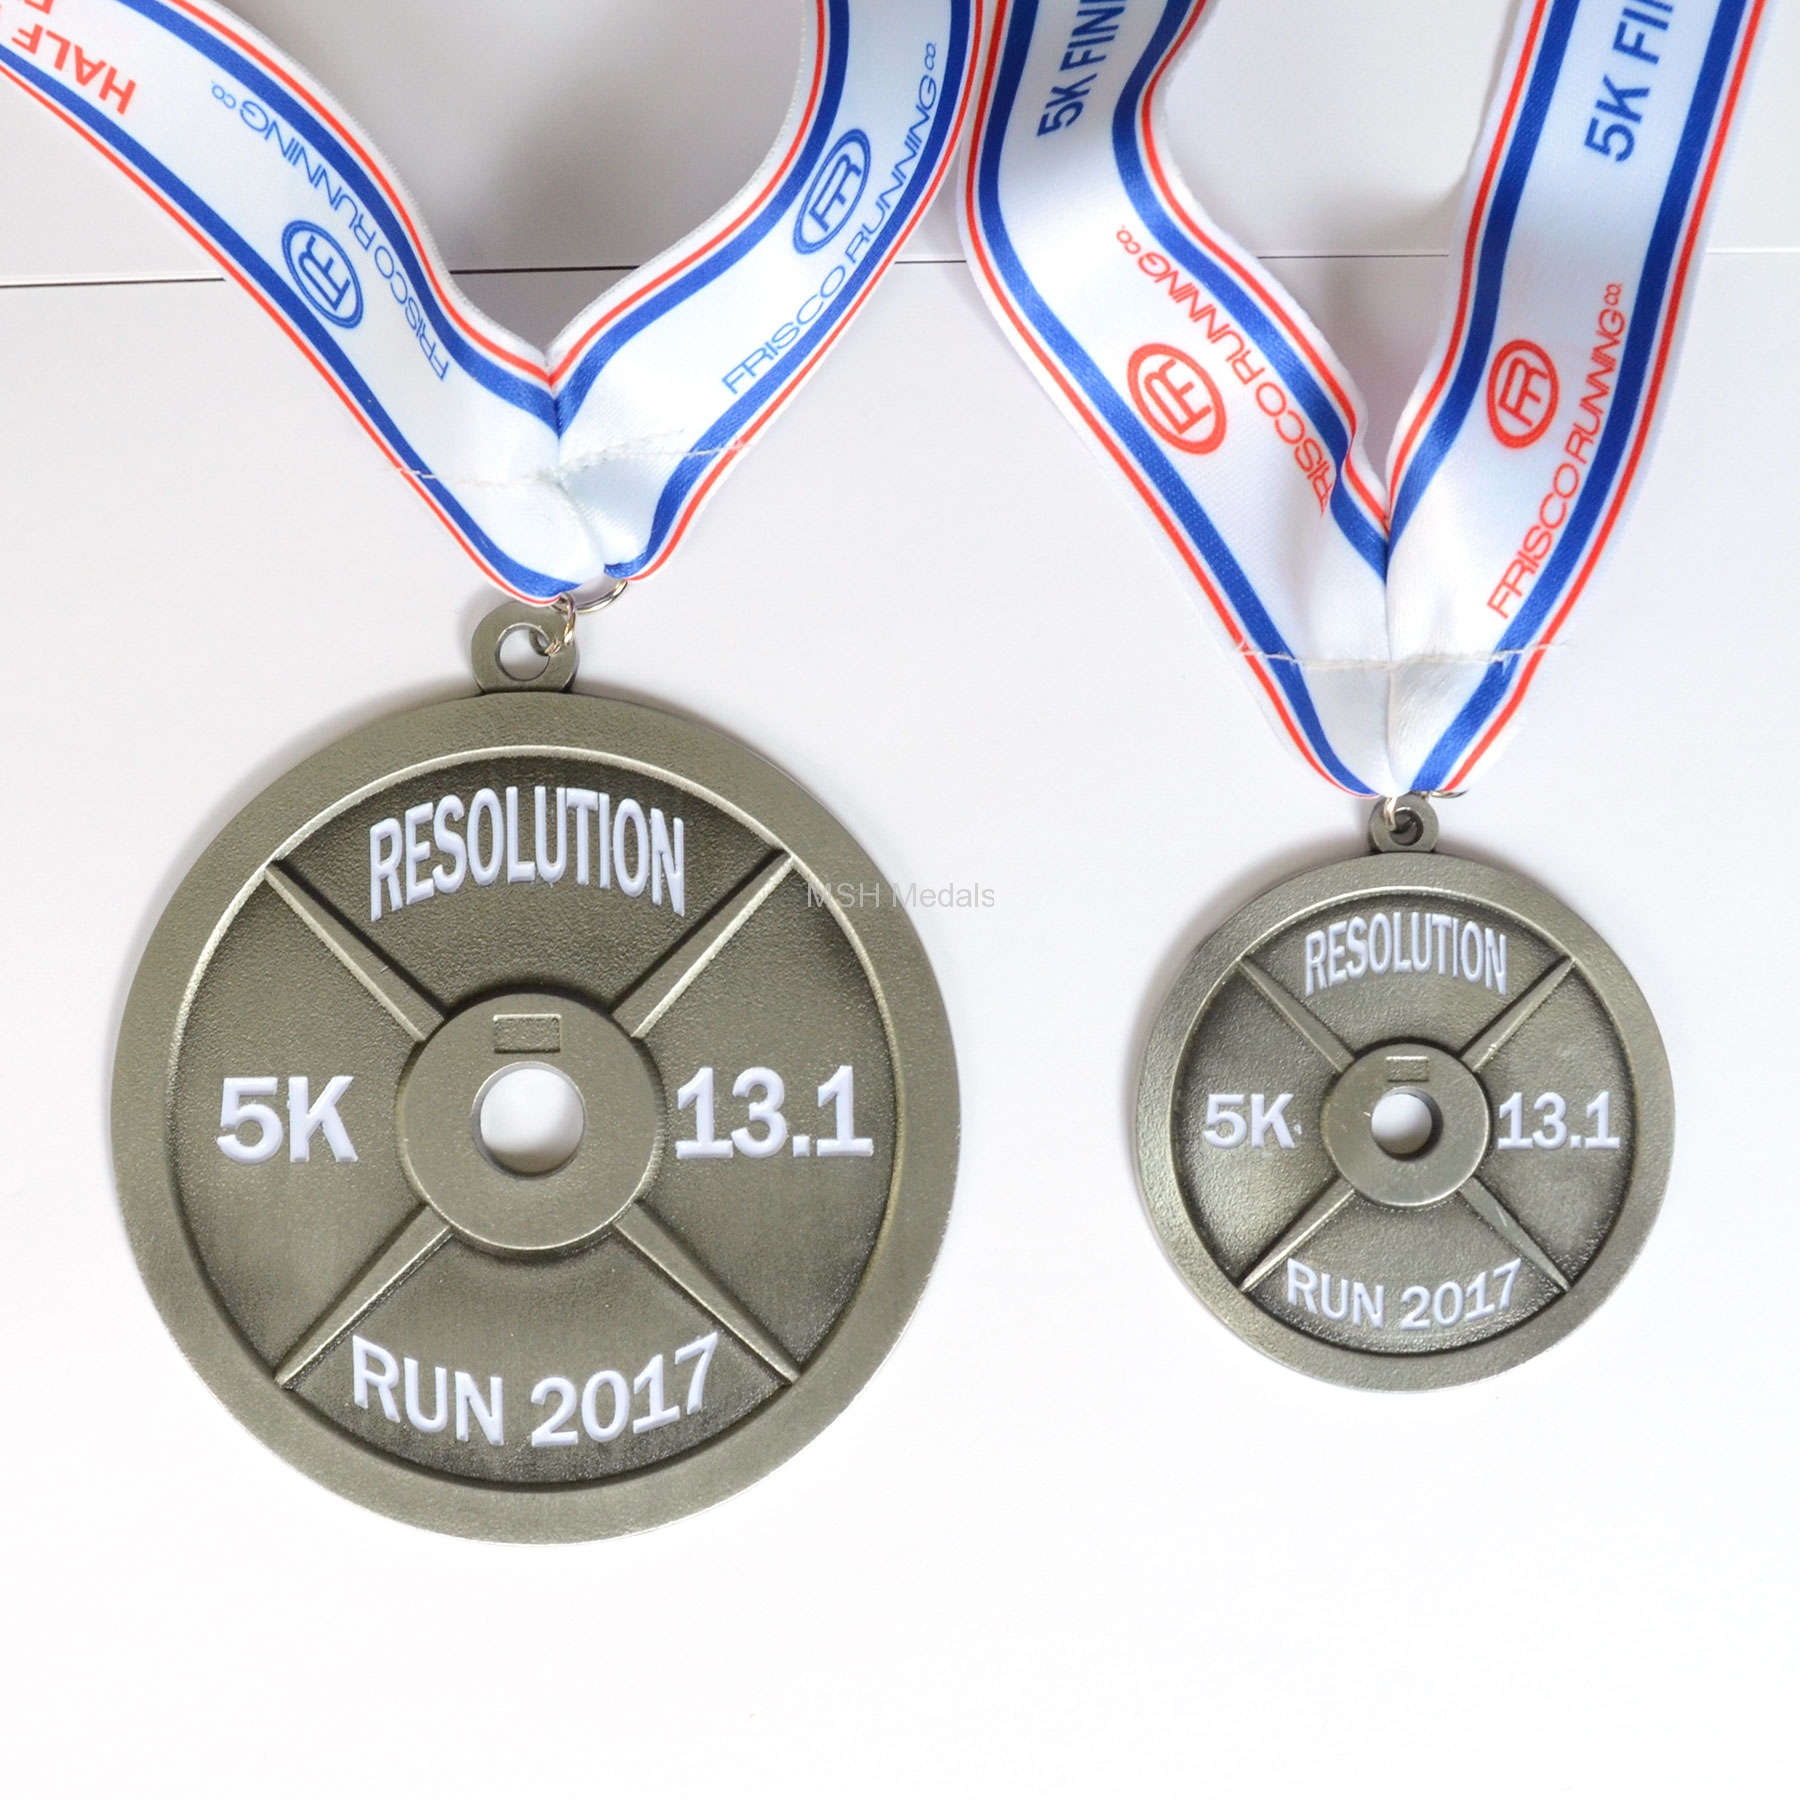 Set of 2 half marathon and 5K race medal in the shape of weights